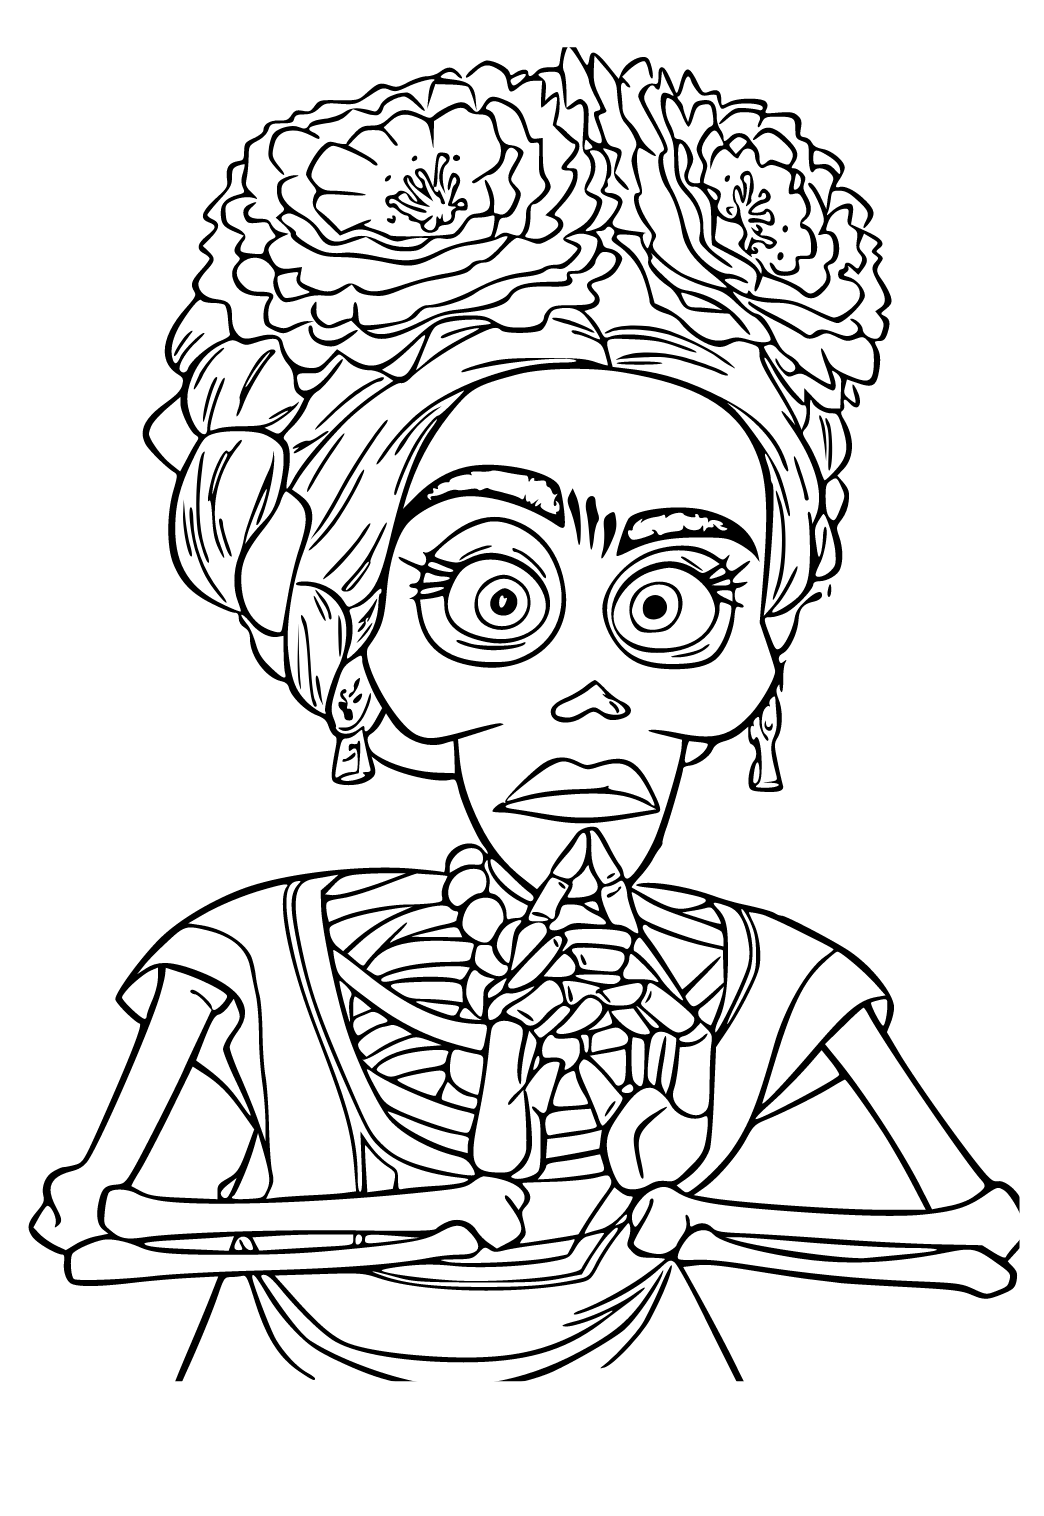 Free Printable Coco Frida Kahlo Coloring Page, Sheet And Picture For ...